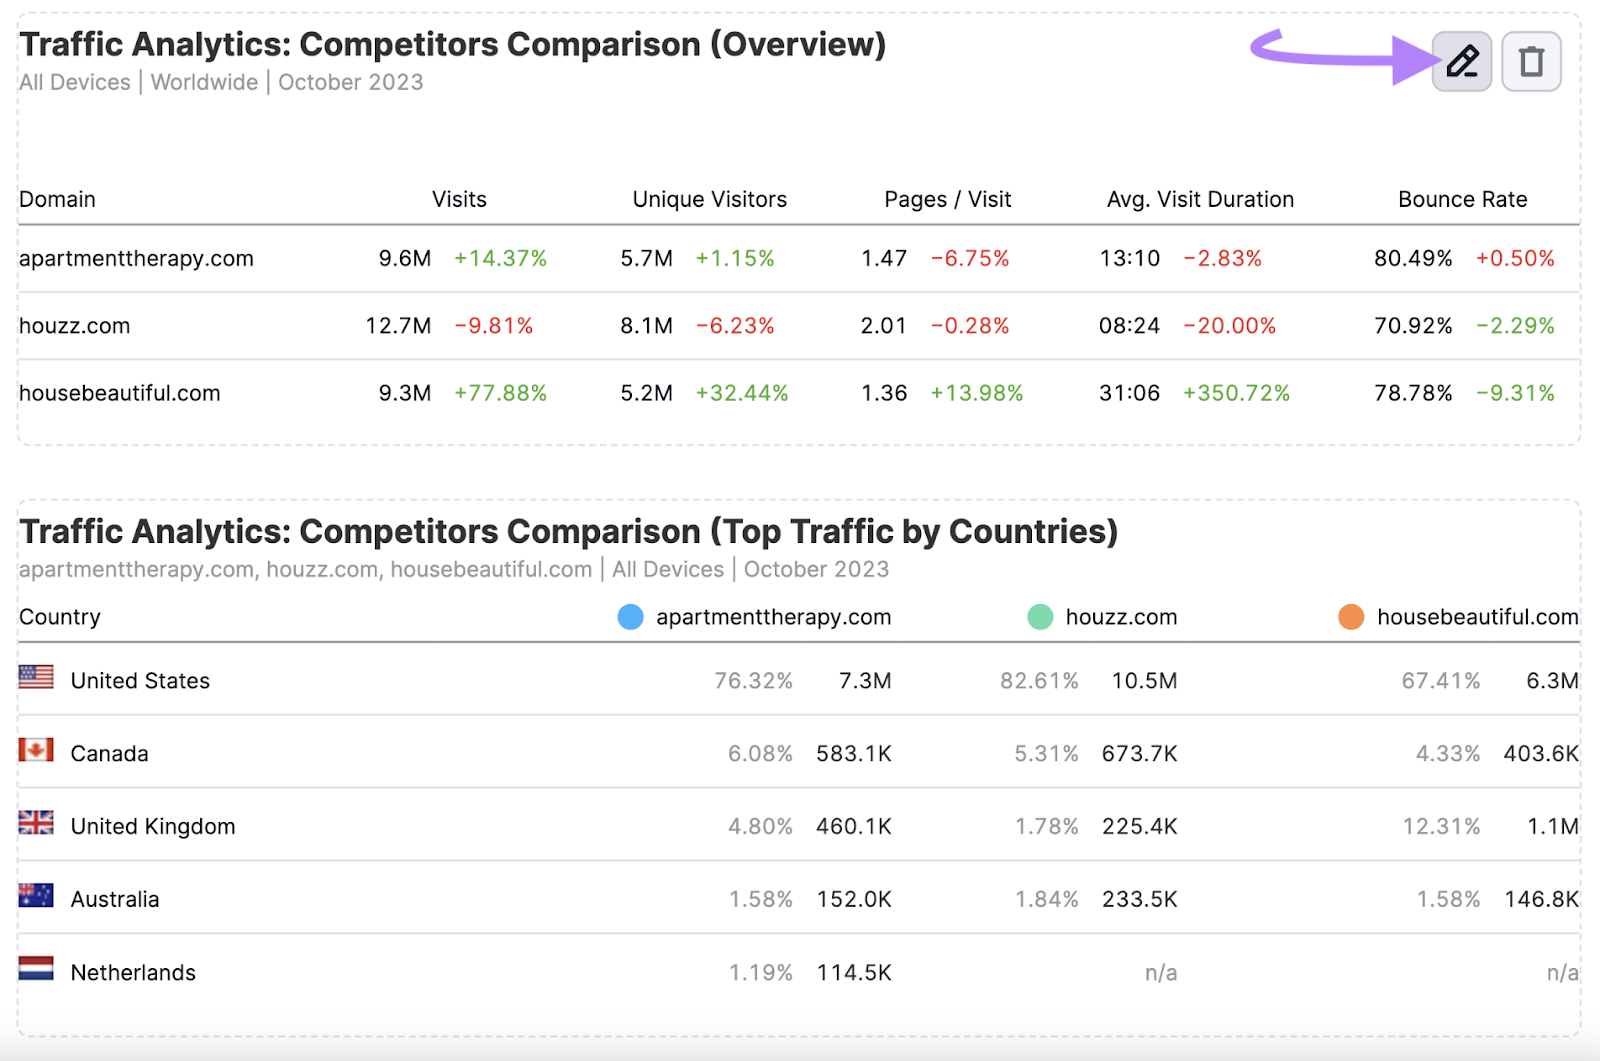 The pencil icon highlighted in the top right corner next to “Traffic Analytics: Competitors Comparison (Overview)" widget